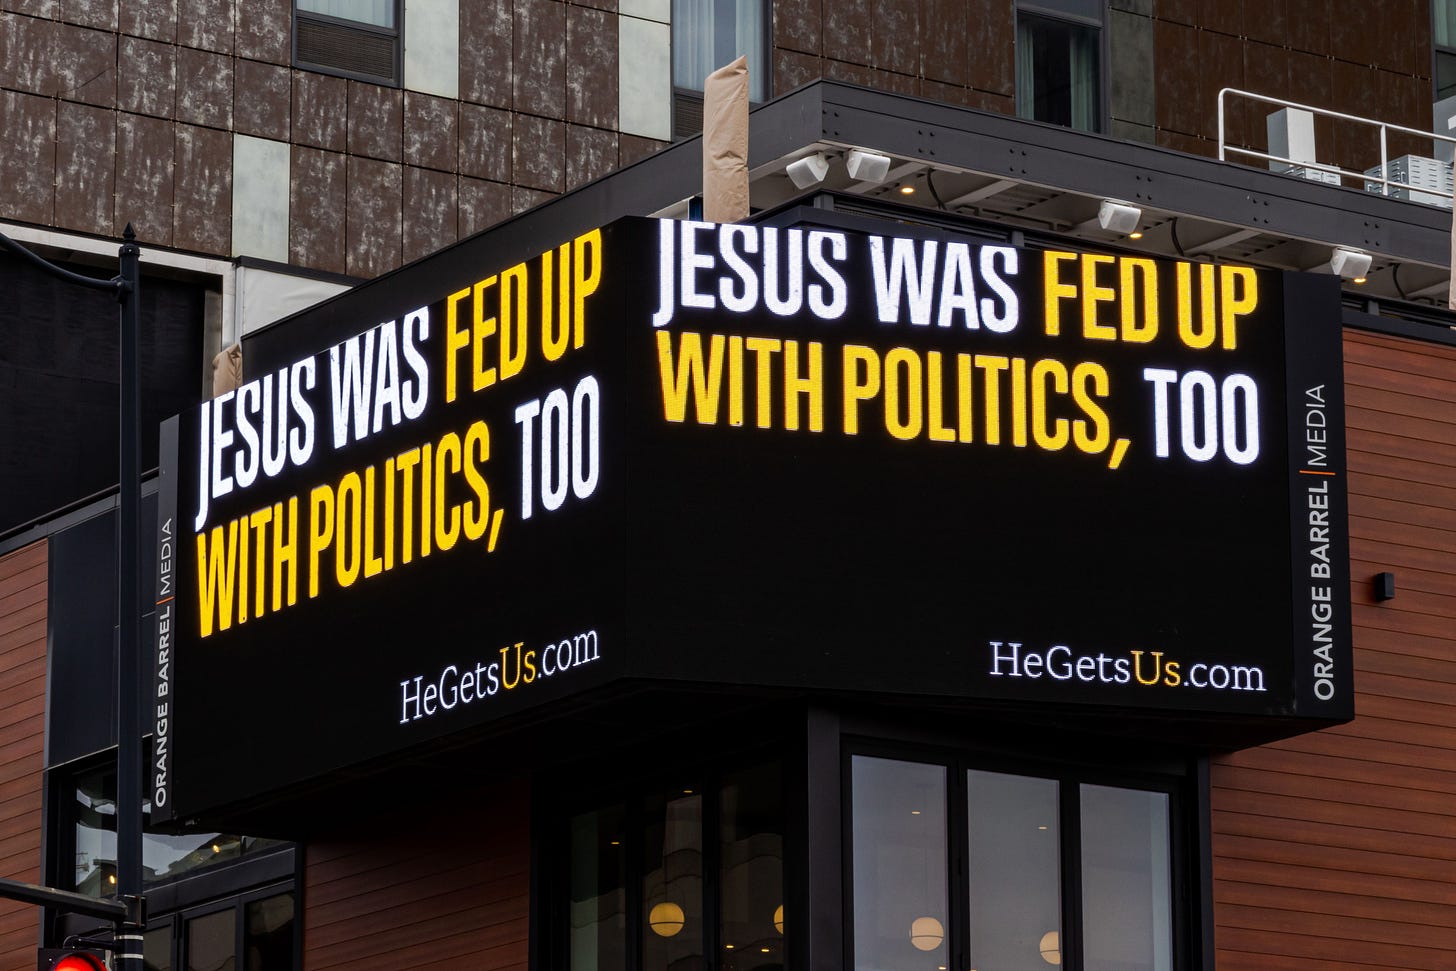 5 things to know about the ‘He Gets Us’ Jesus ad campaign | Catholic News Agency